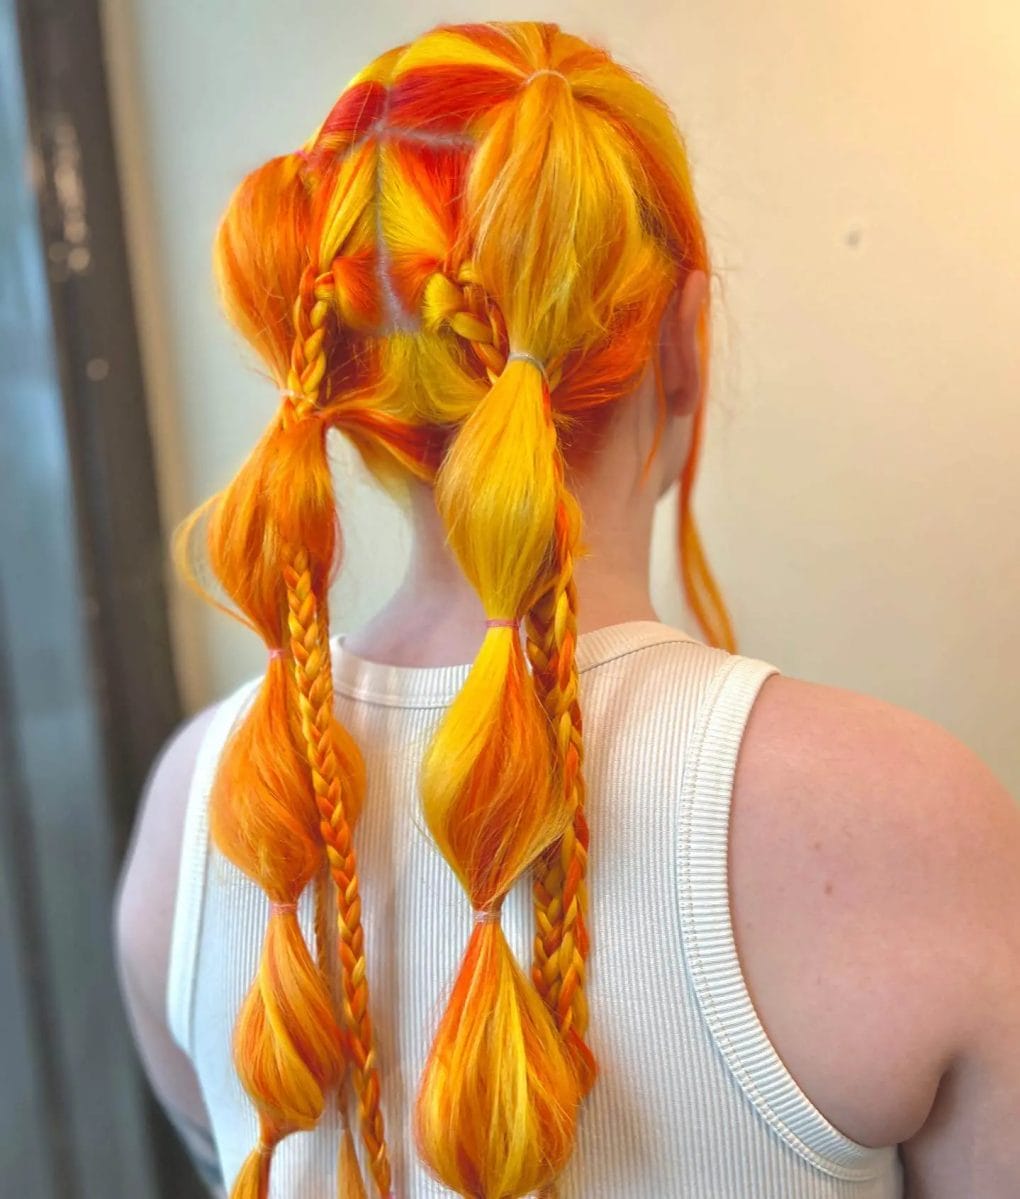 Ombré twin braids in fiery shades of orange, red, and yellow, ending in whimsical tassels for a festival look.